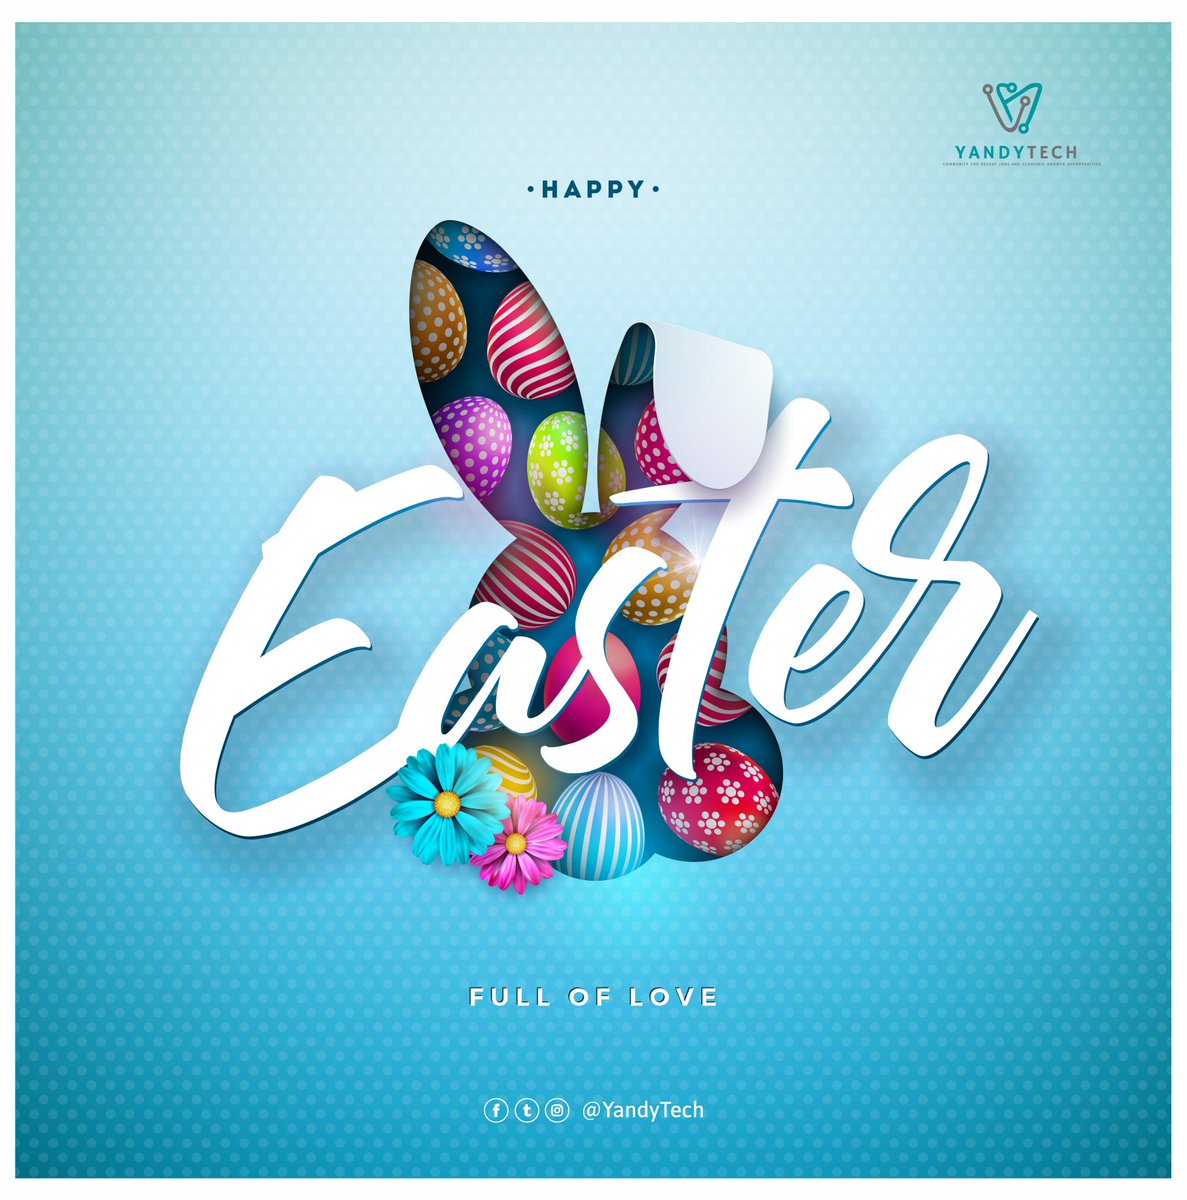 On this day, we are sharing in the love, peace and hope of Easter 

Happy Easter Celebration

#Easter #hope #Easterholiday